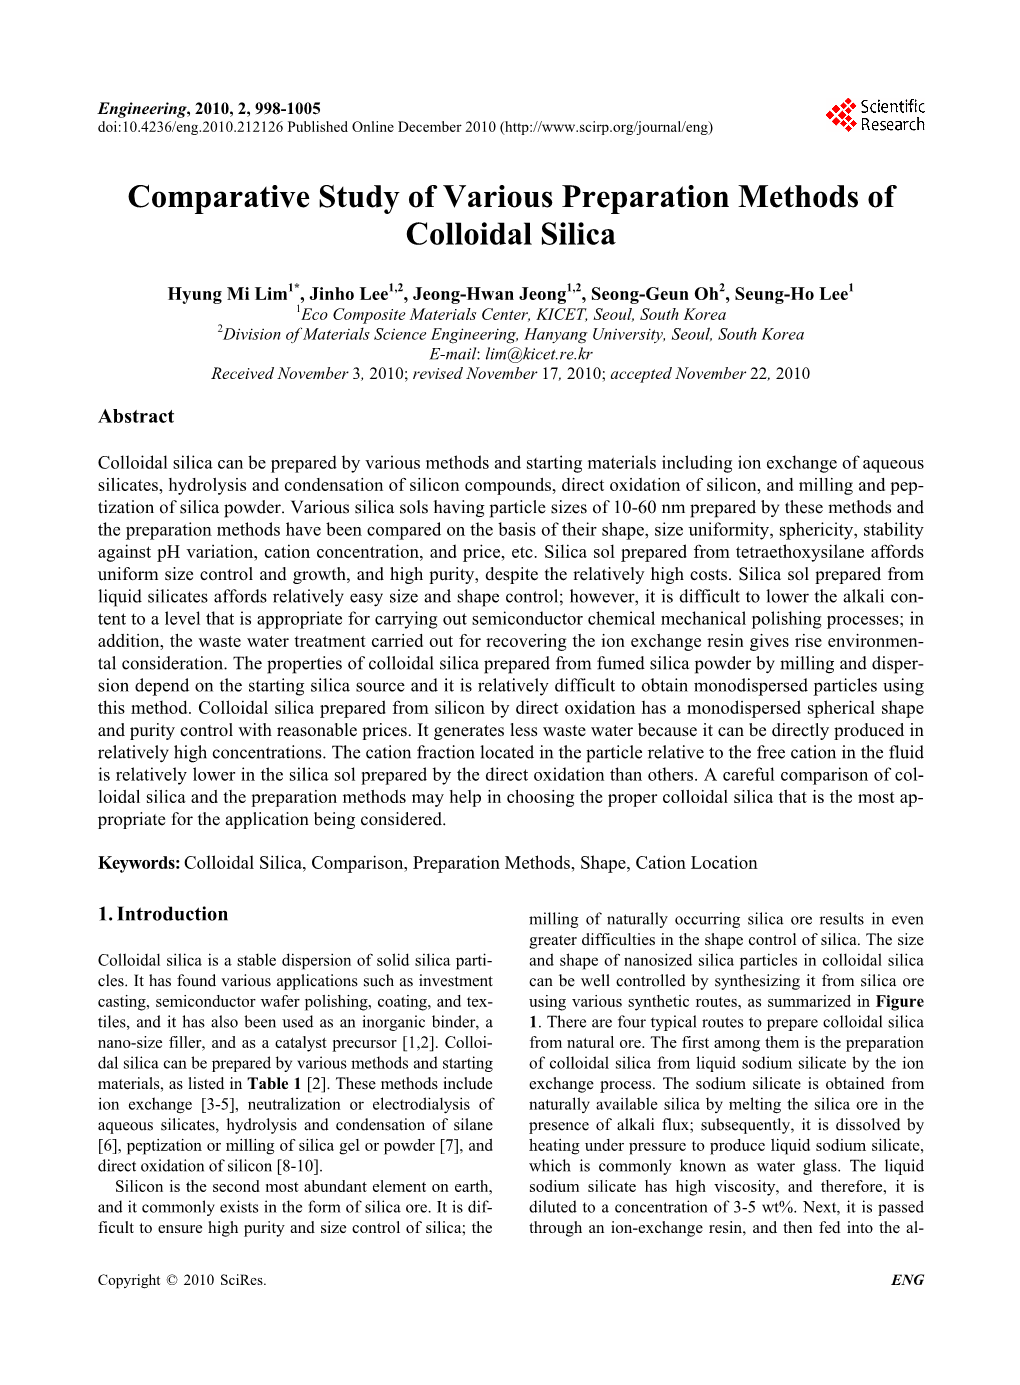 Comparative Study of Various Preparation Methods of Colloidal Silica